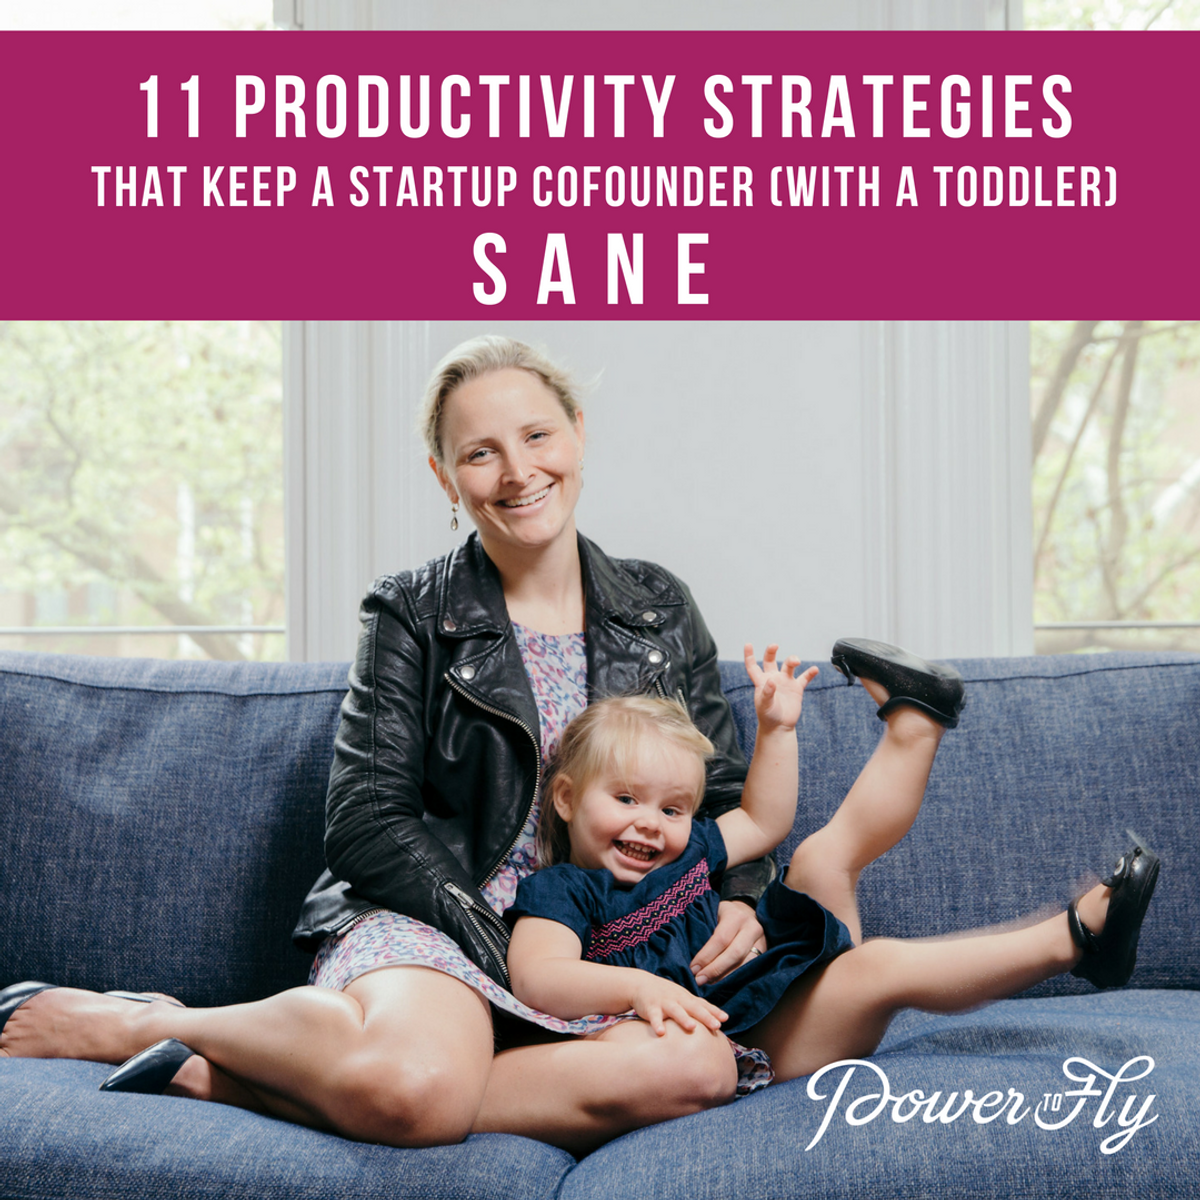 11 Productivity Strategies That Keep A Startup CoFounder (With A Toddler) Sane